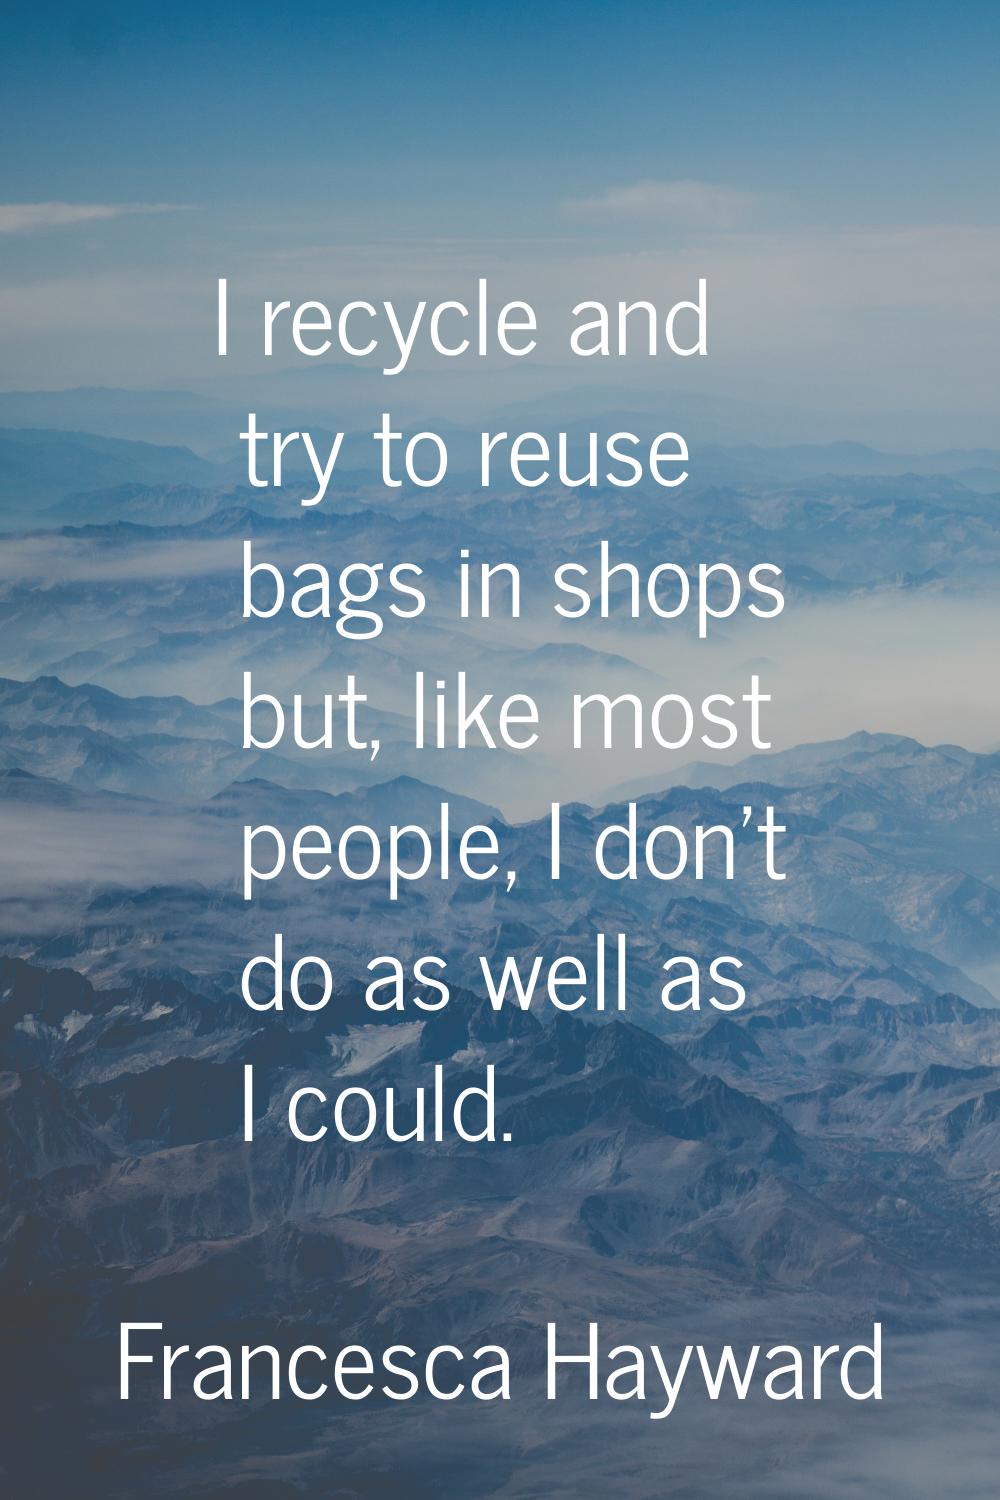 I recycle and try to reuse bags in shops but, like most people, I don't do as well as I could.